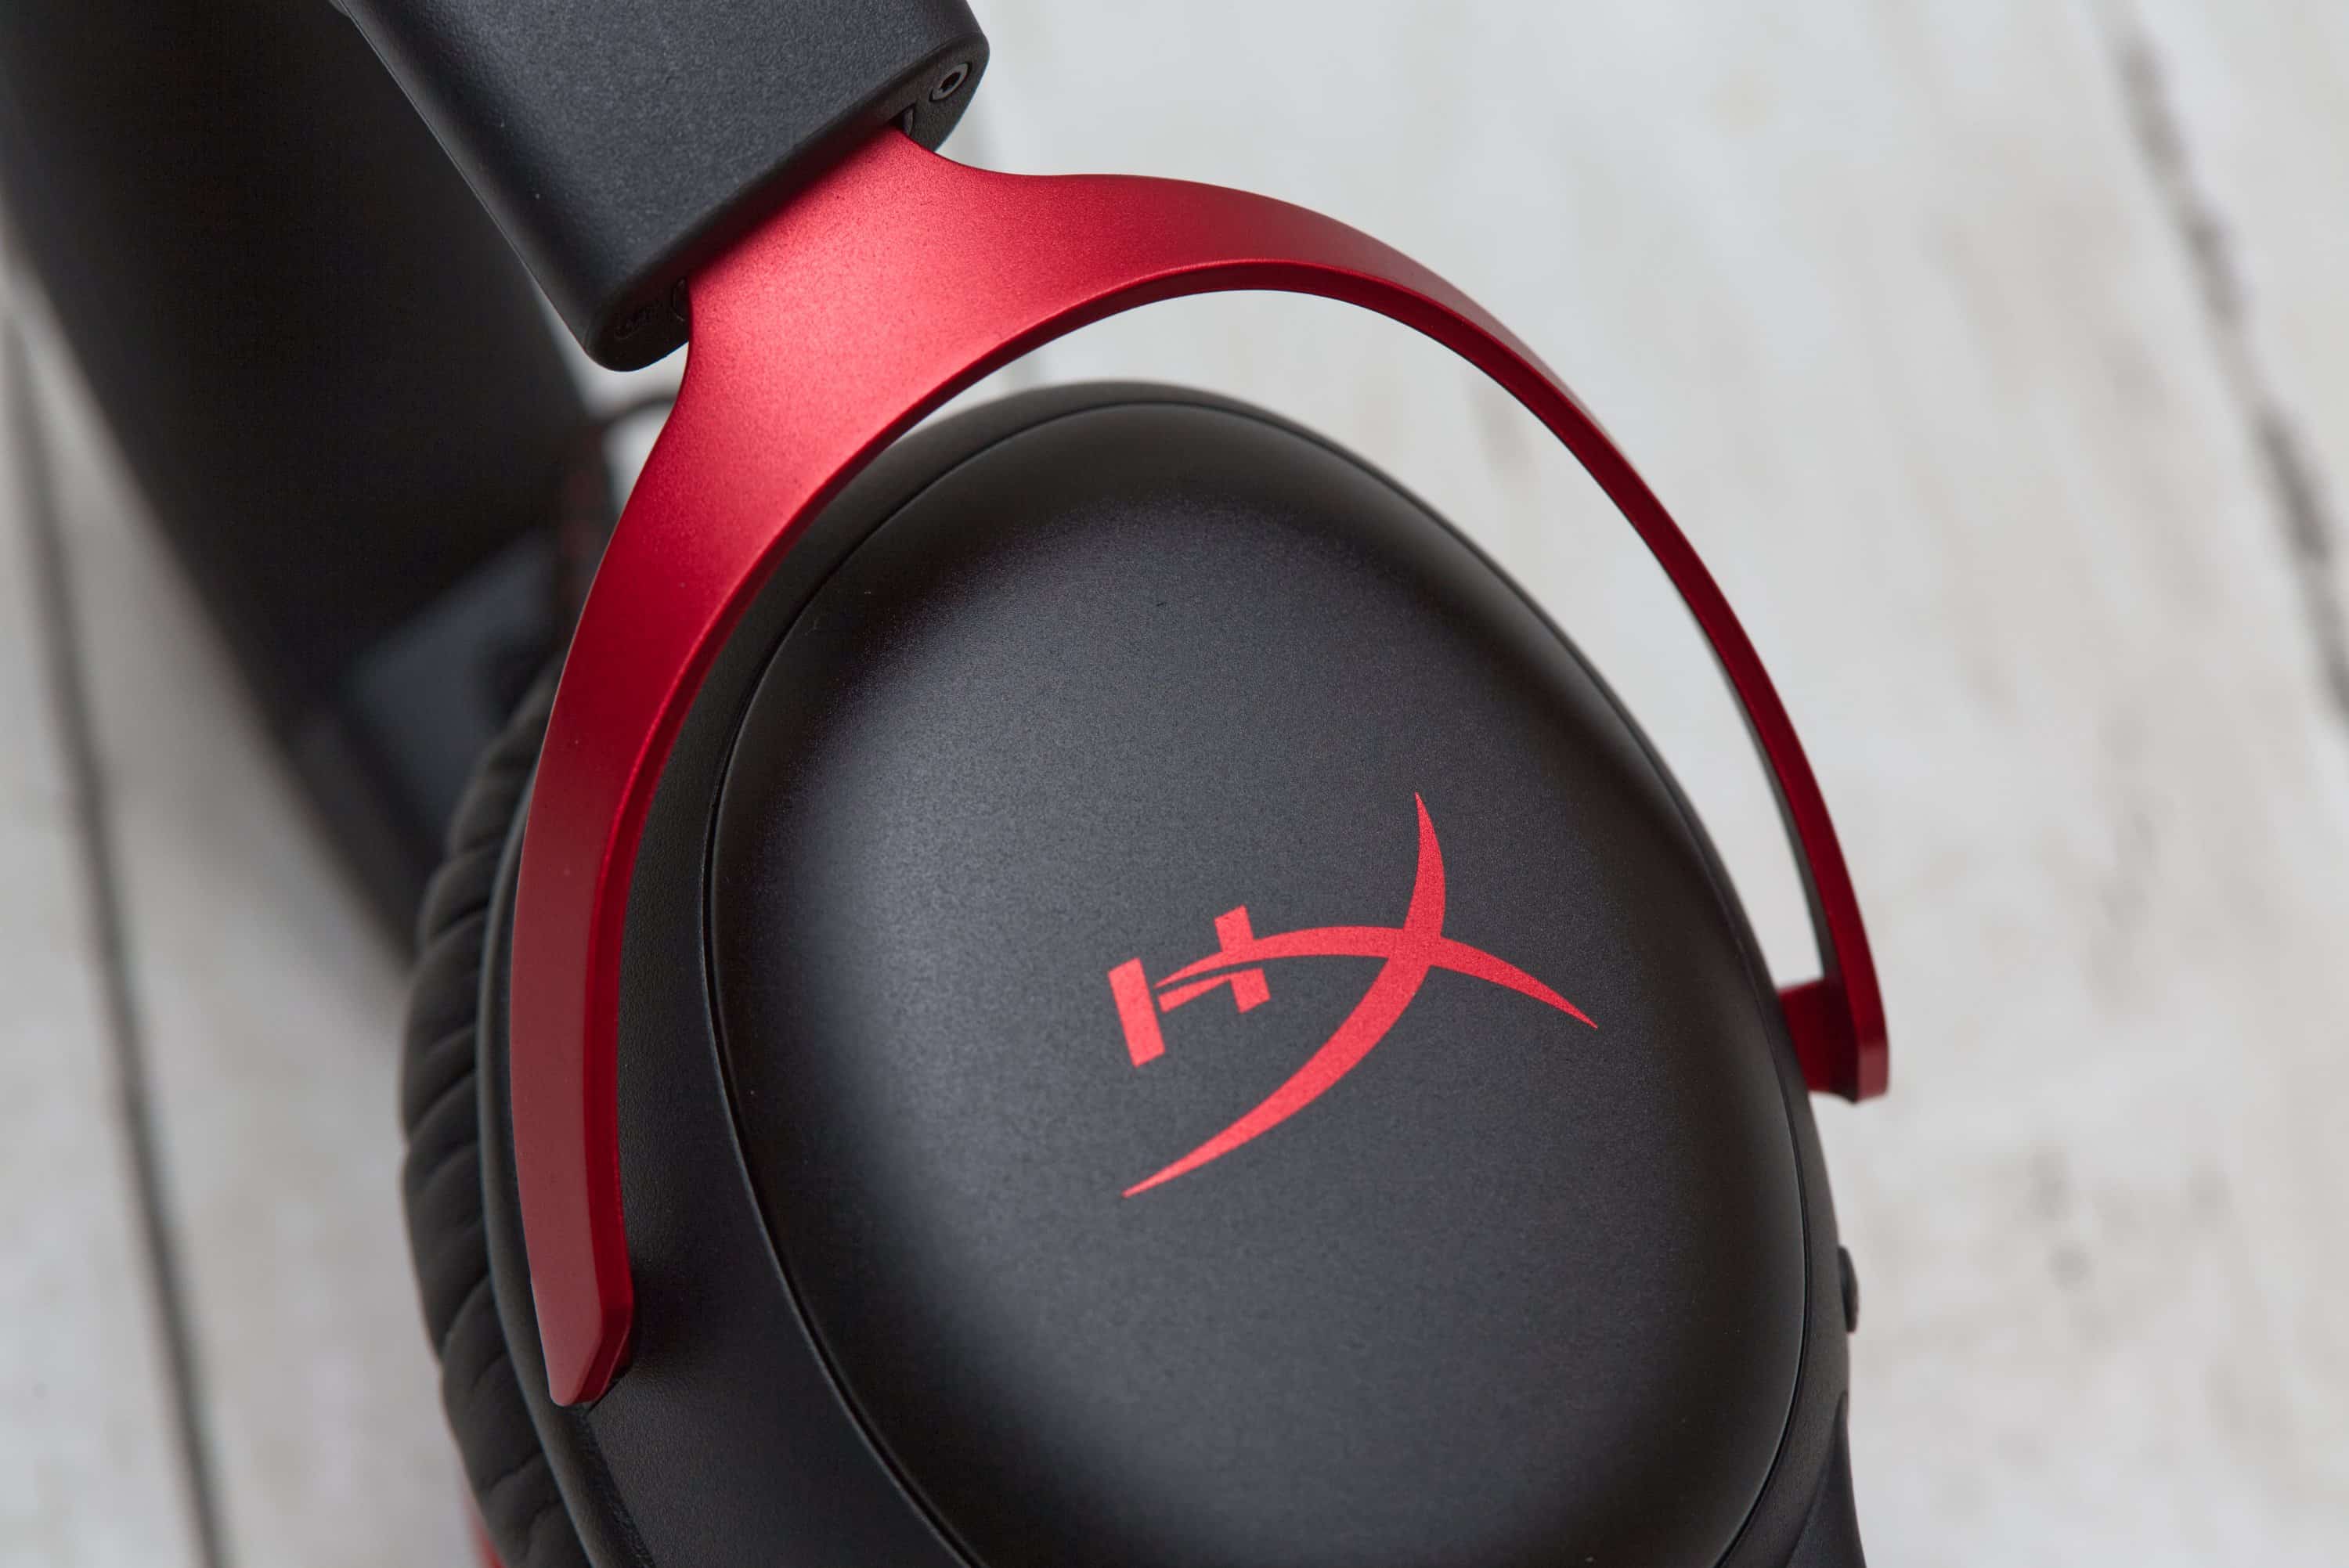 next Cloud of headsets the HyperX review III - gaming generation